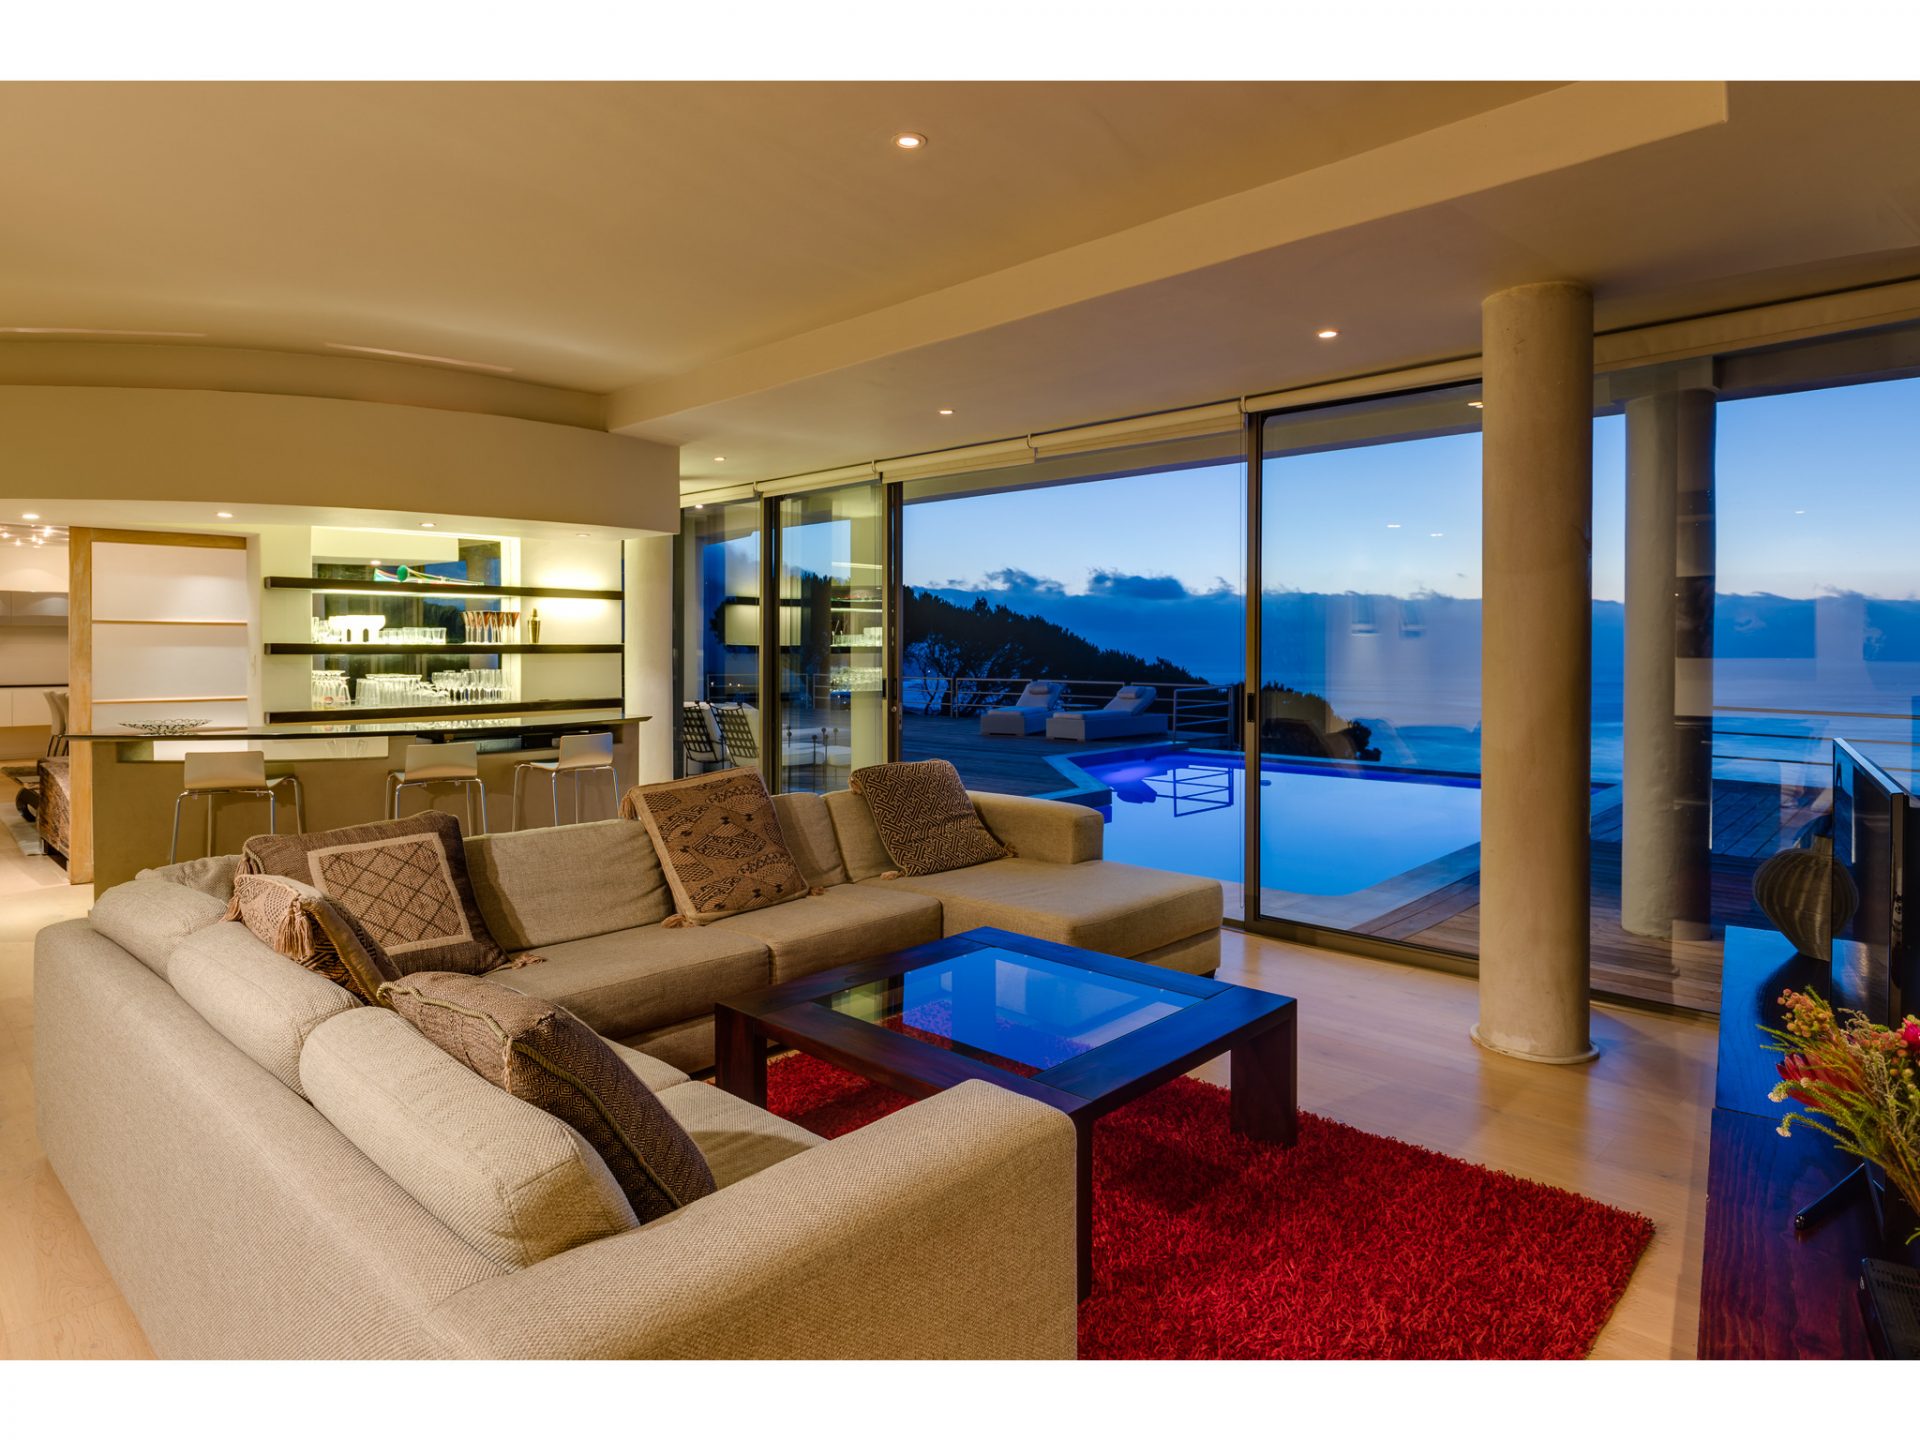 Photo 7 of Geneva Sunsets accommodation in Camps Bay, Cape Town with 6 bedrooms and 7 bathrooms